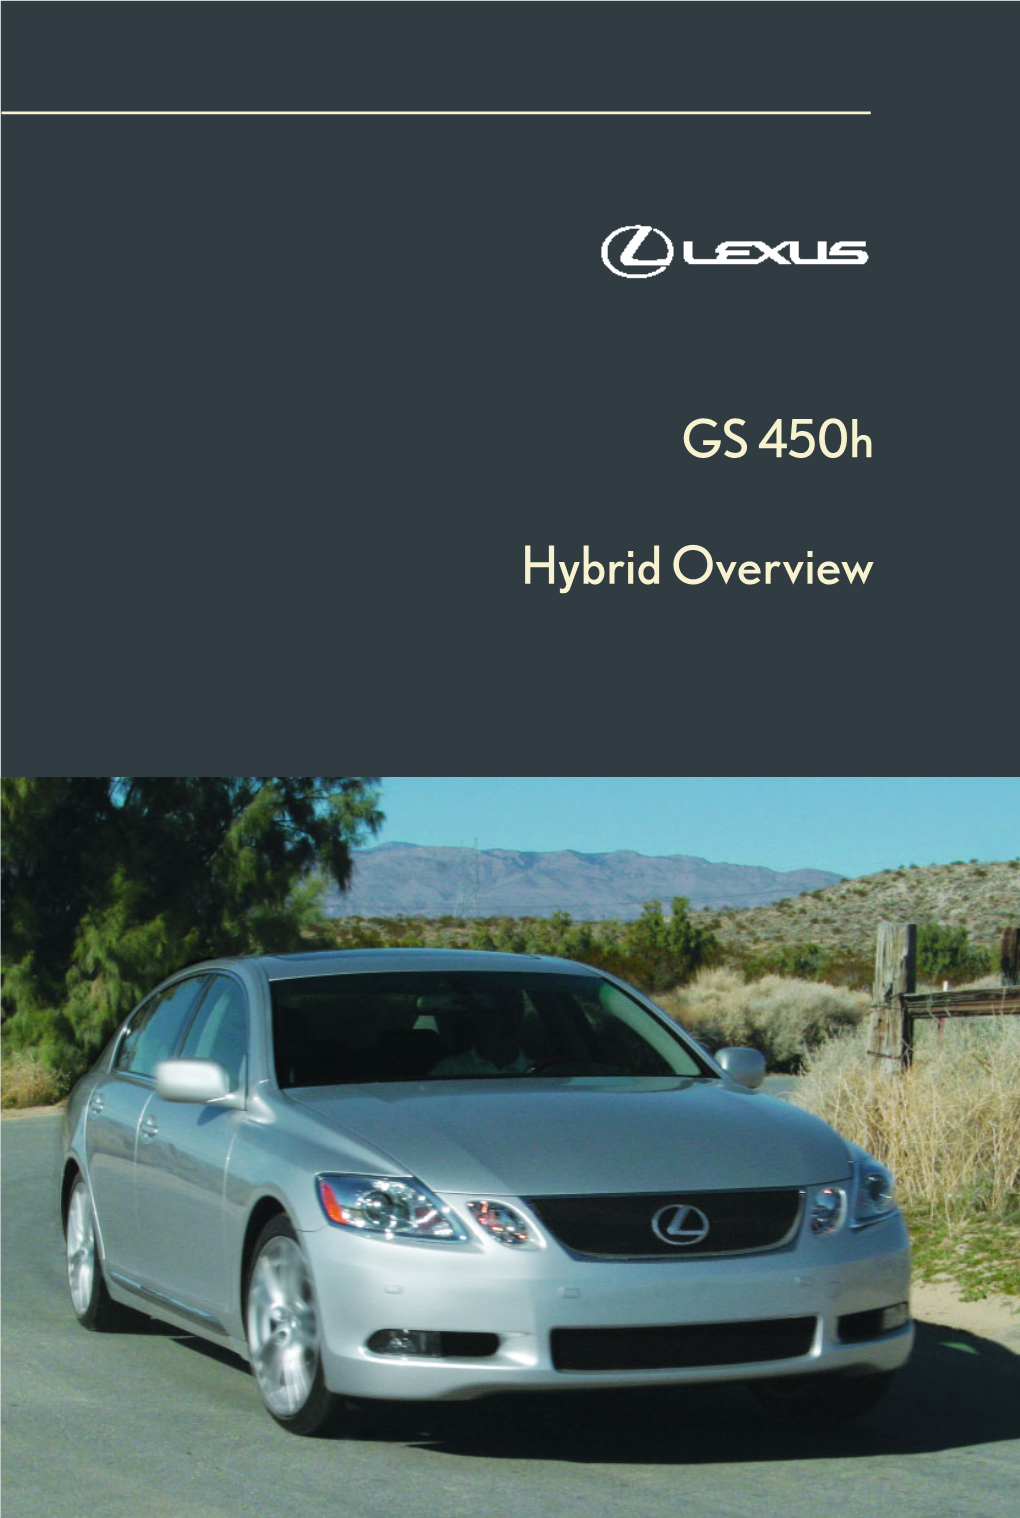 GS 450H Hybrid Overview